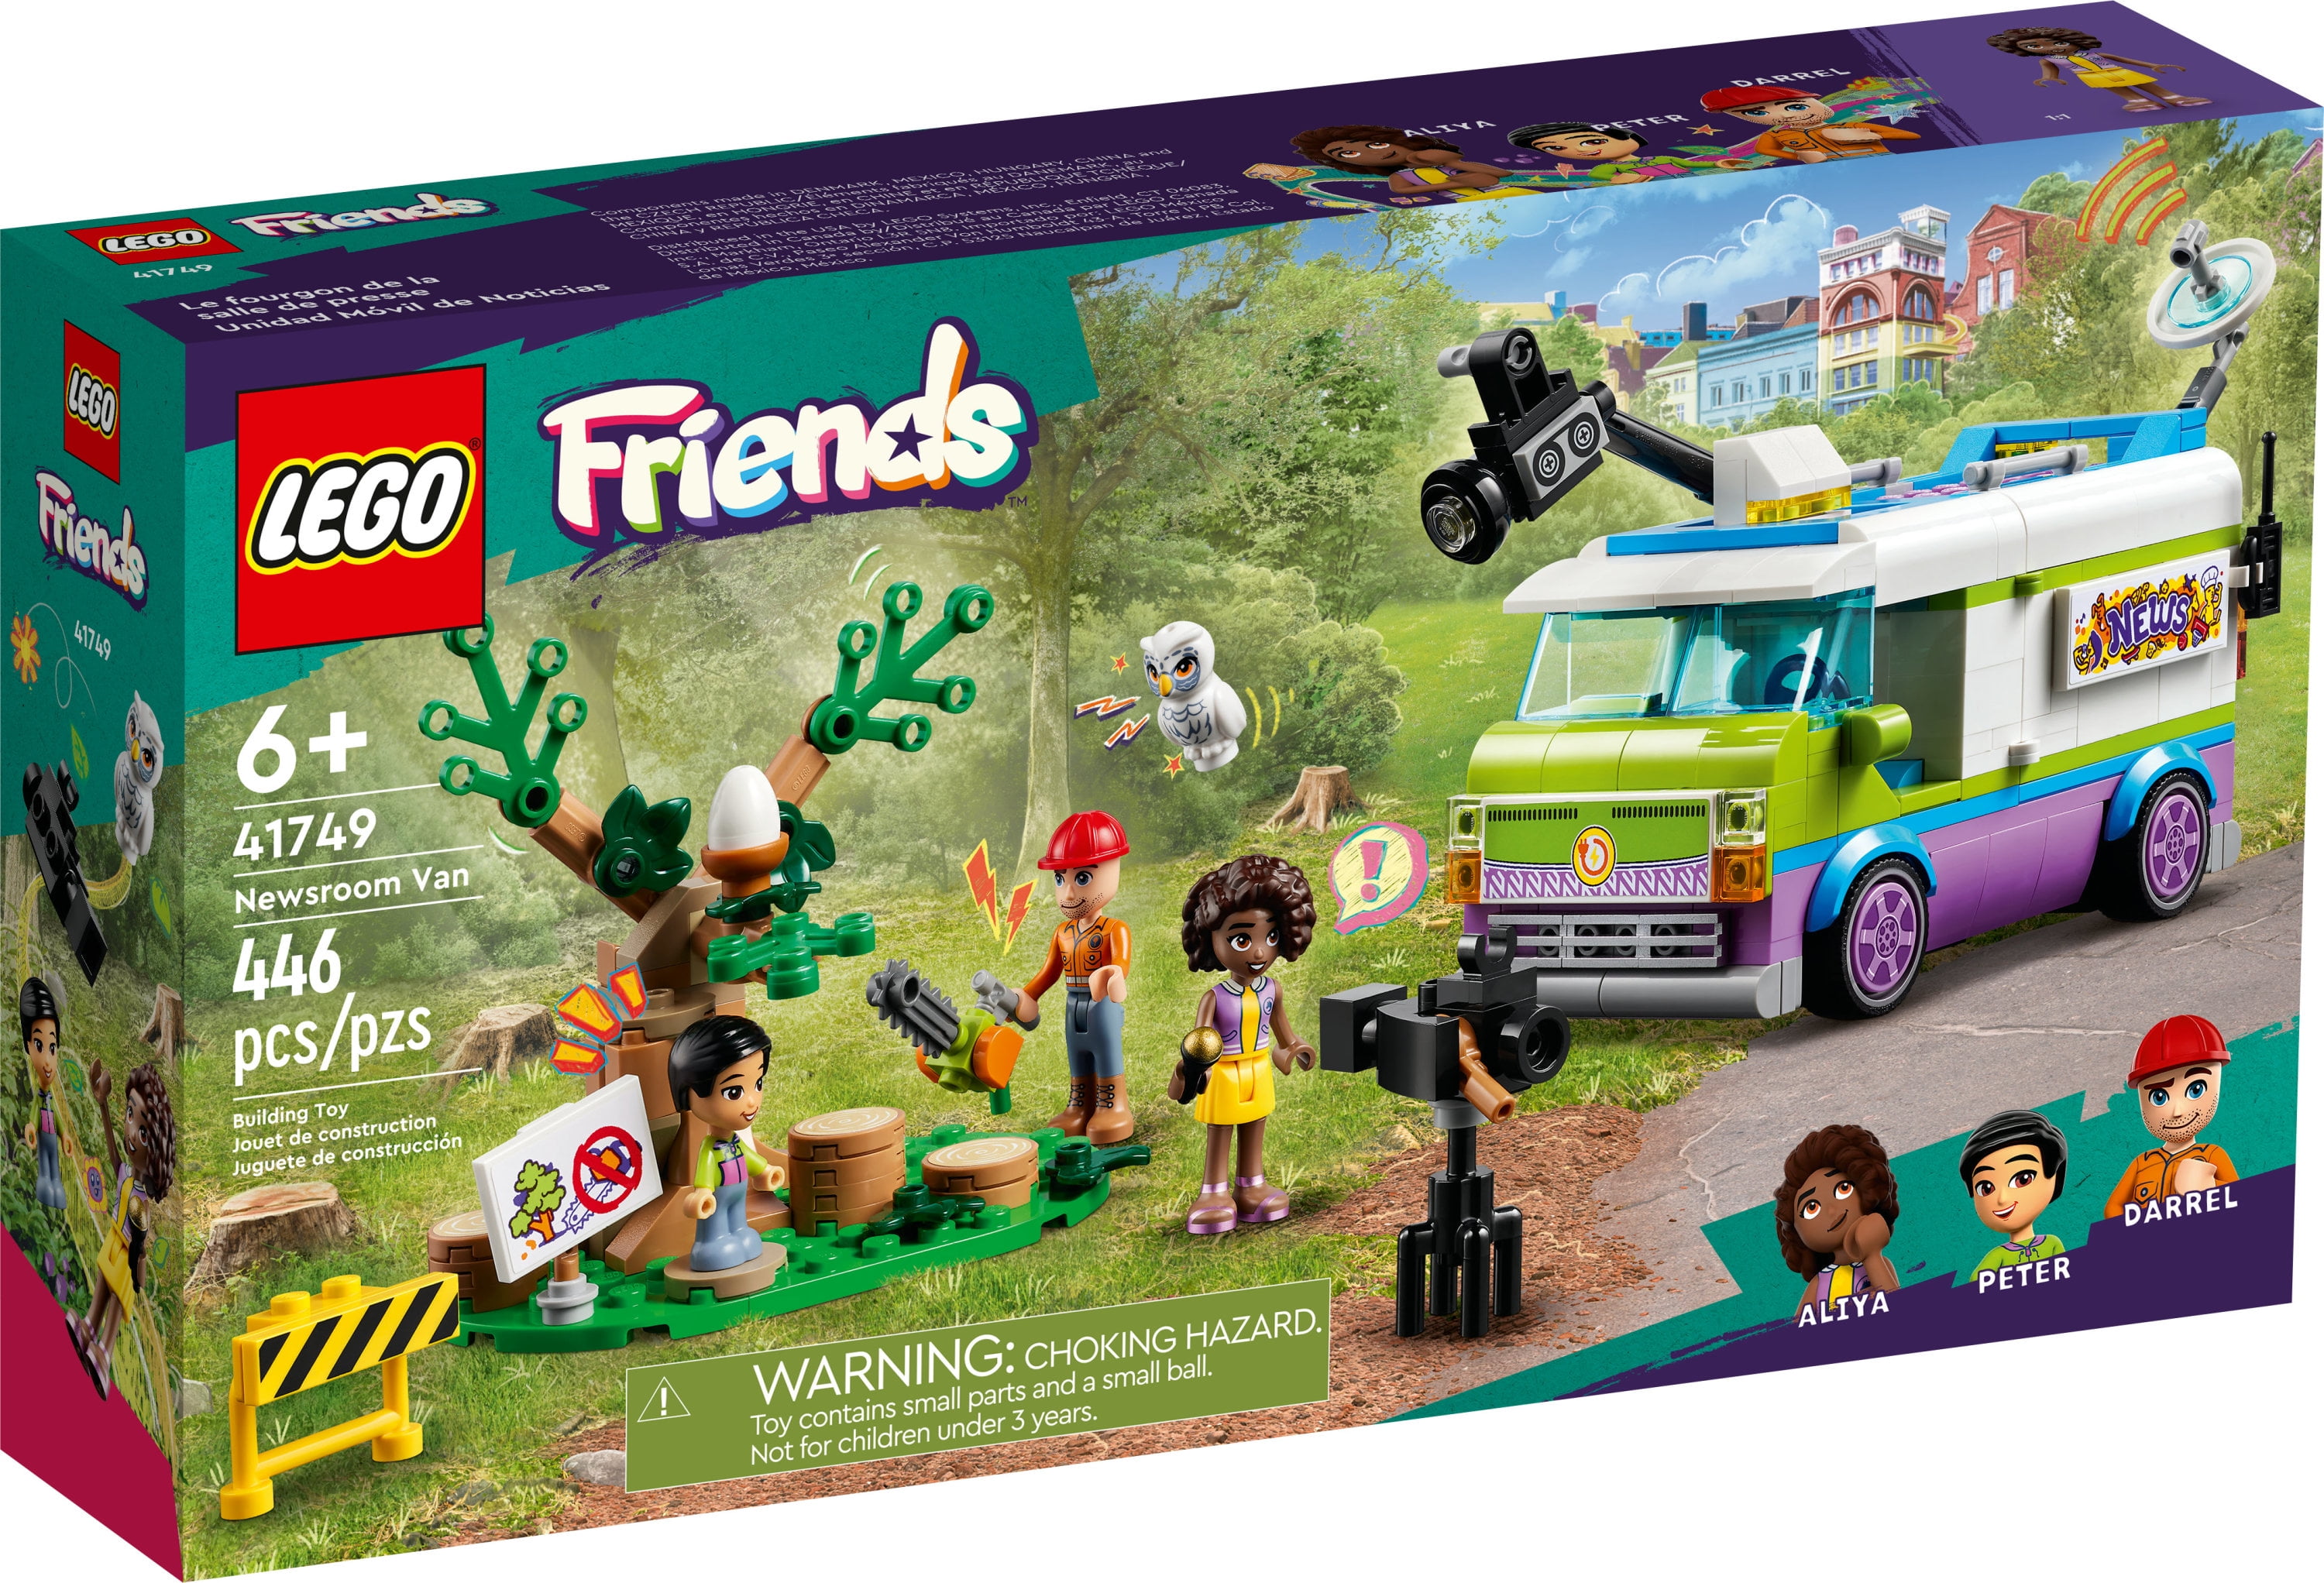 LEGO LEGO Friends Children's Bright Yellow Lime Green Lunch Box